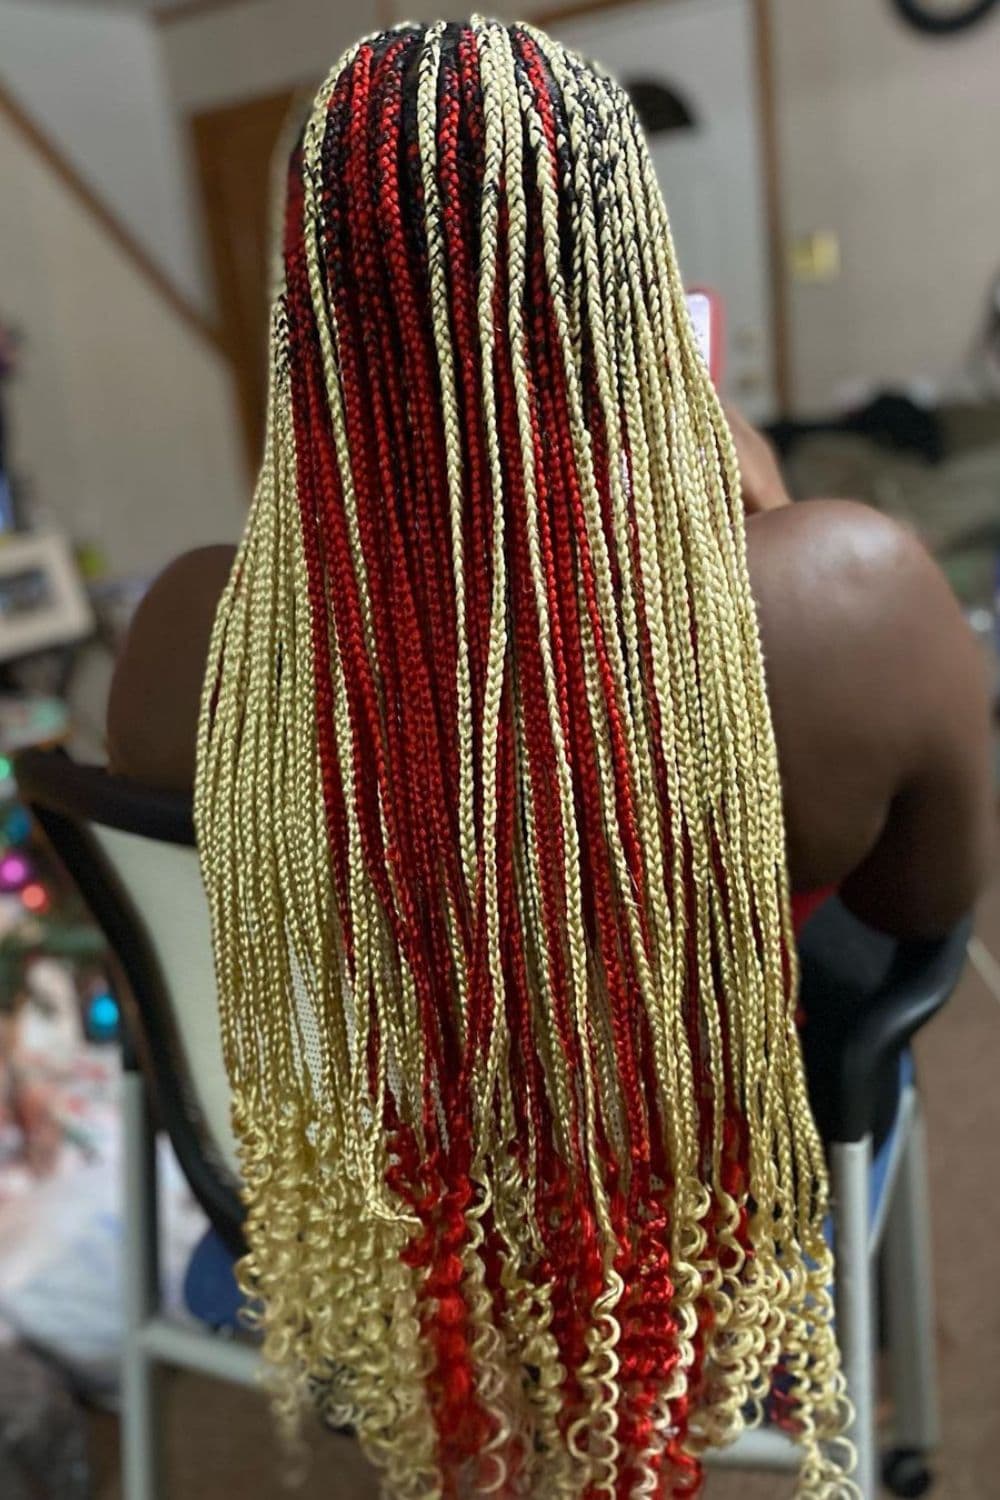 A woman with red and blonde knotless braids with curly ends.